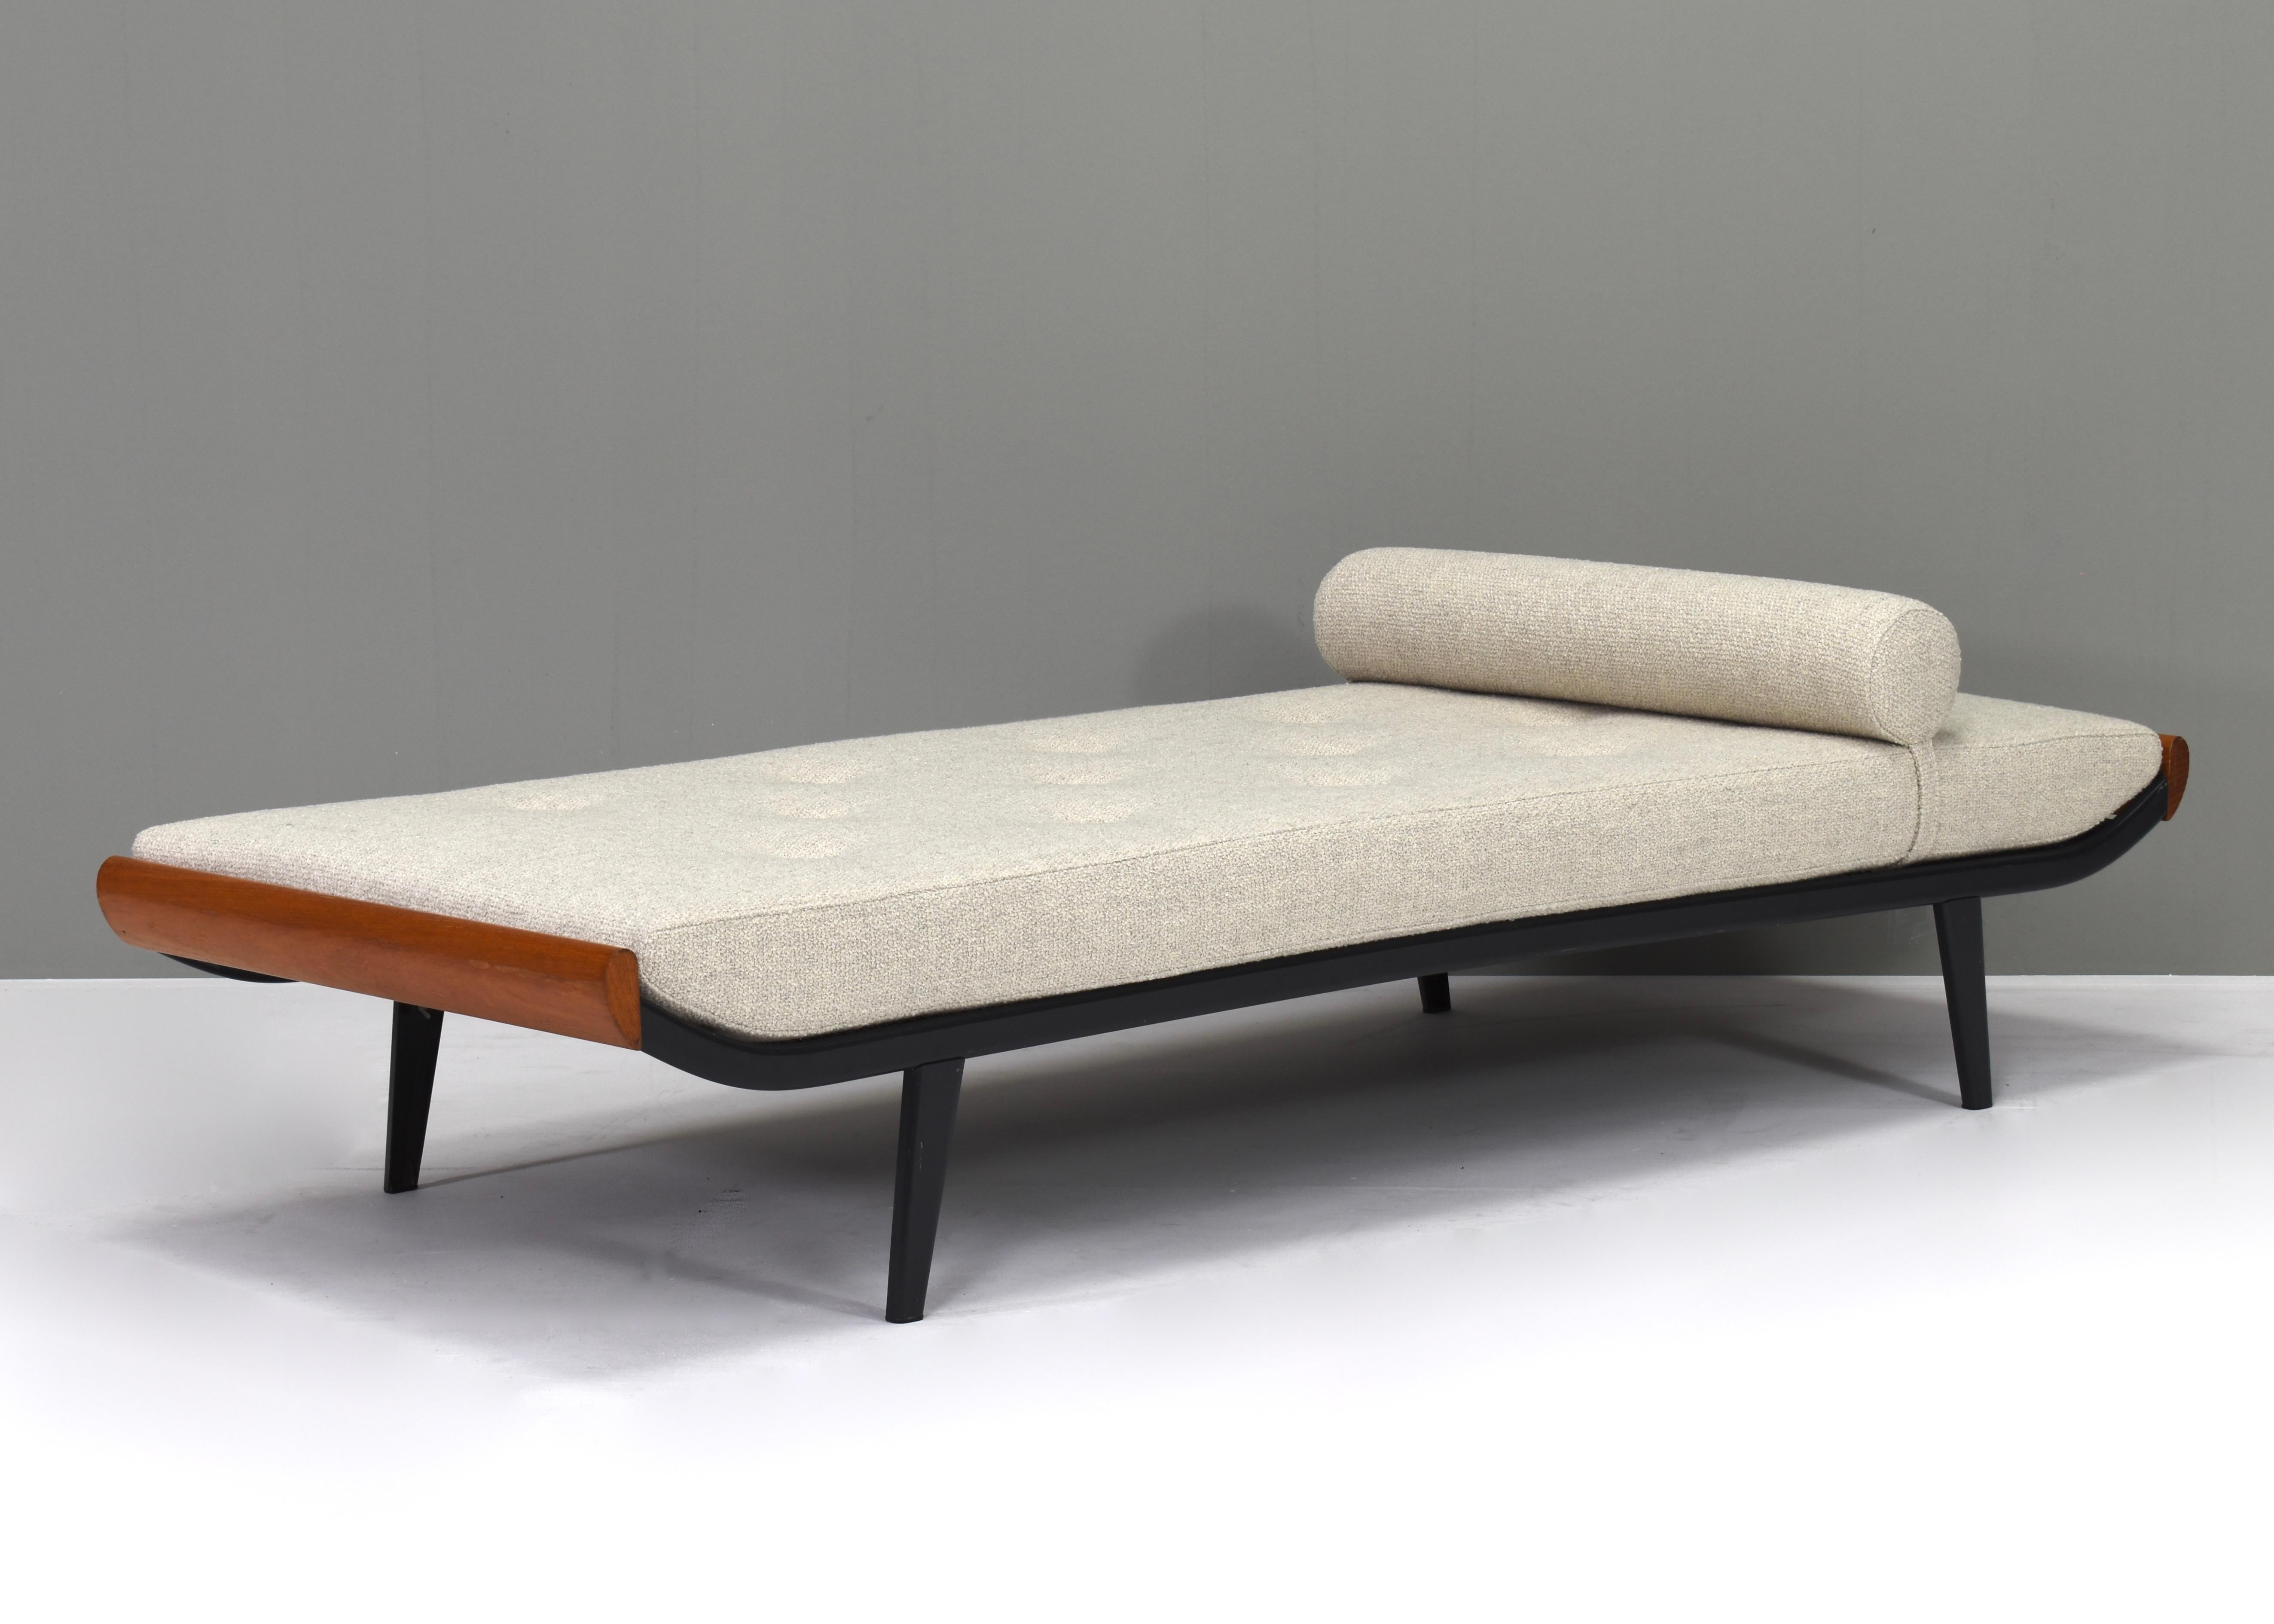 Mid-20th Century Cleopatra Daybed Designed by Cordemeijer for Auping, Netherlands, 1954